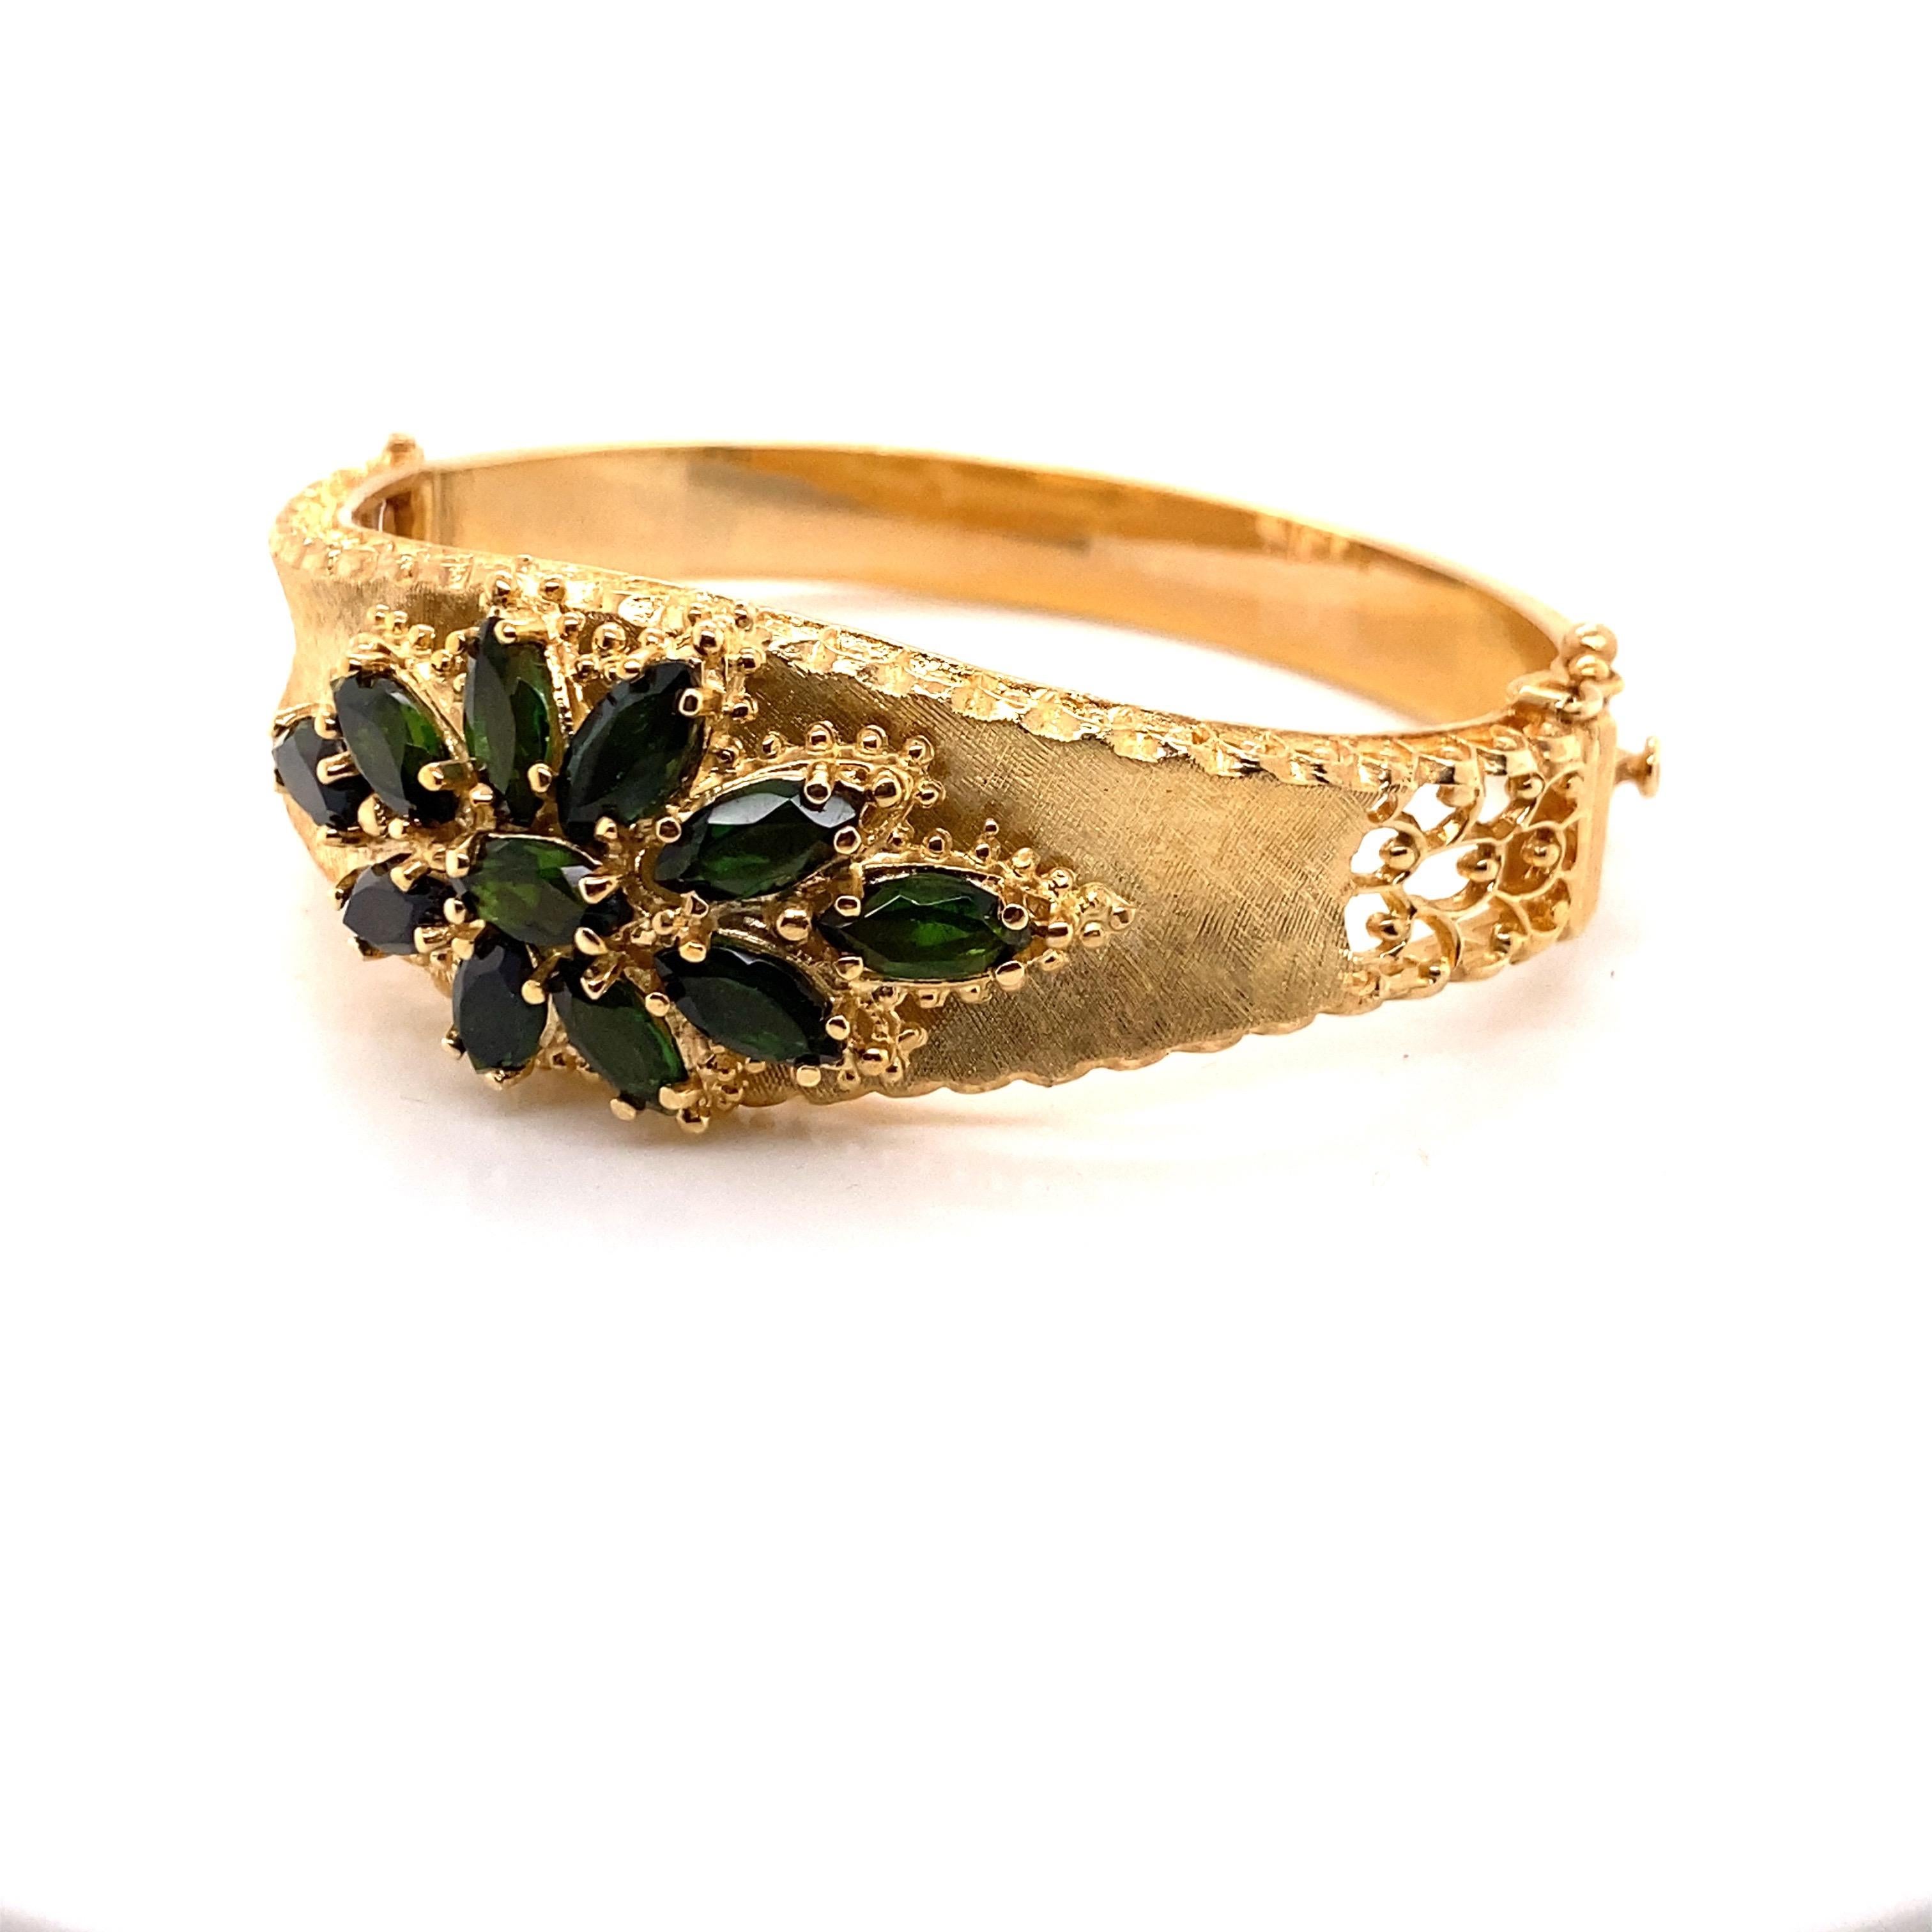 Marquise Cut Vintage 14K Yellow Gold Bangle Bracelet with Green Tourmaline